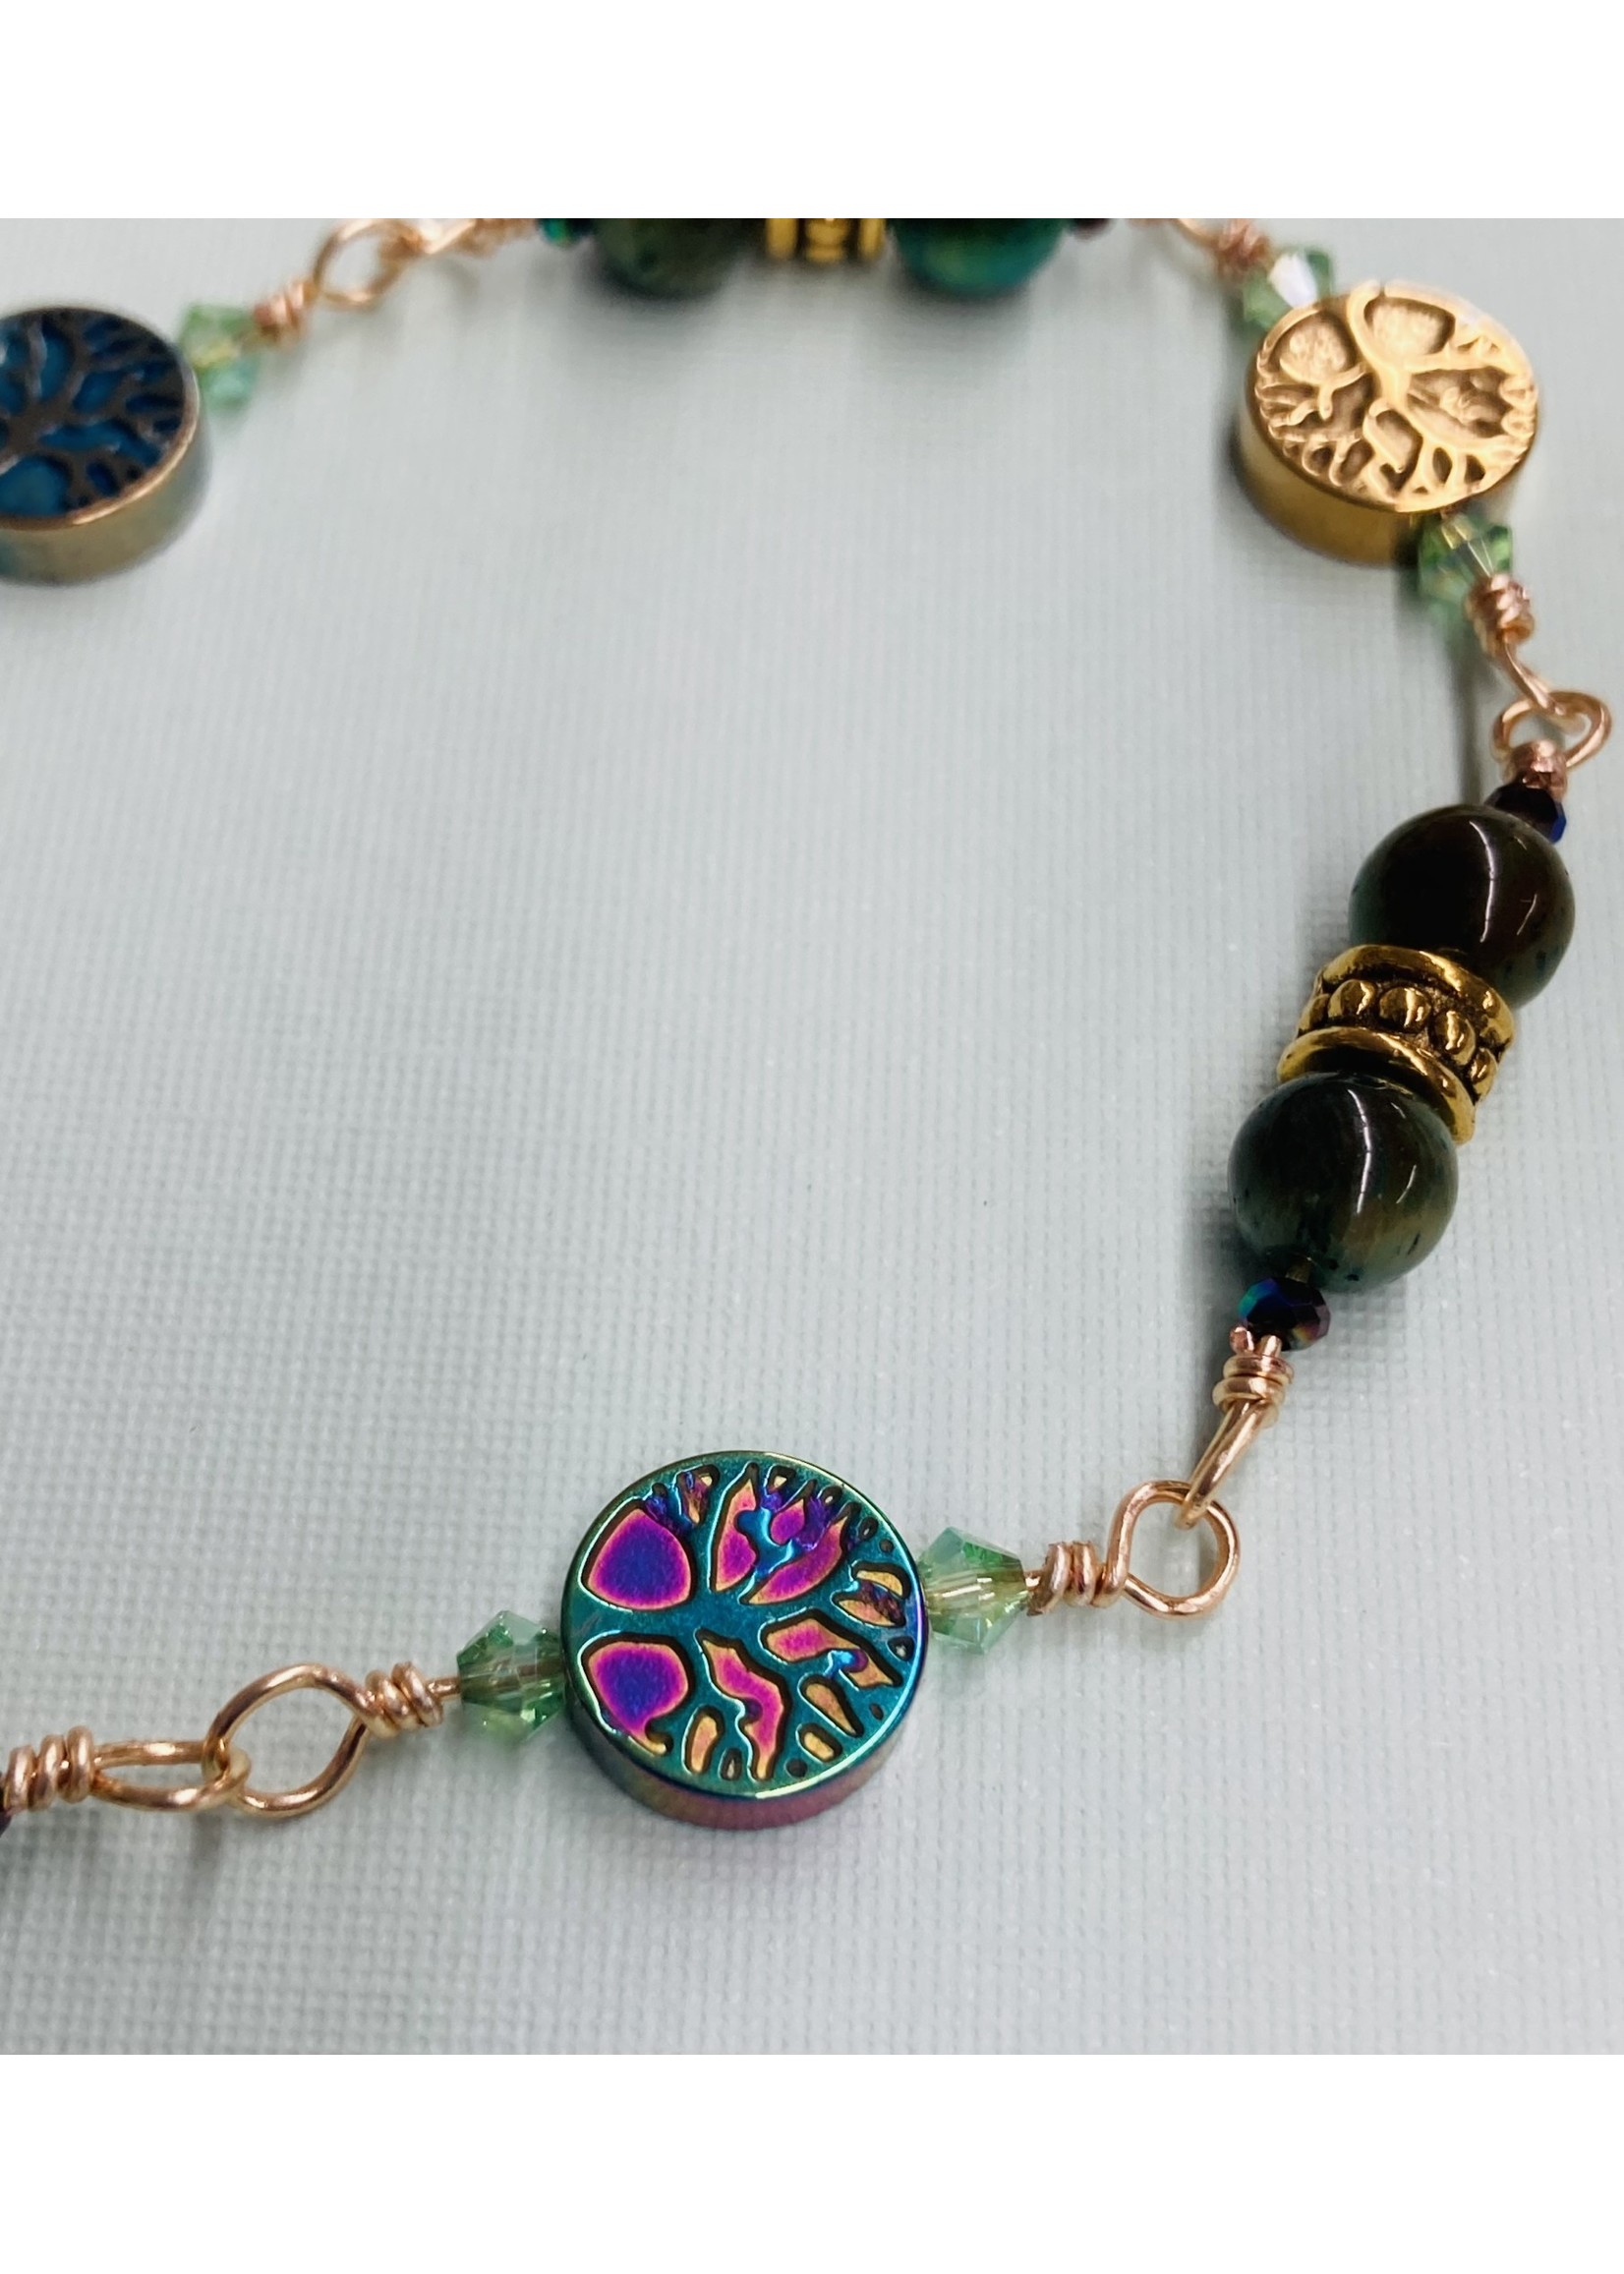 Our Twisted Dahlia B002 Galaxy Tiger Eye Beads with Iridescent Metallic Tree of Life Beads with Gold Accent Bracelet